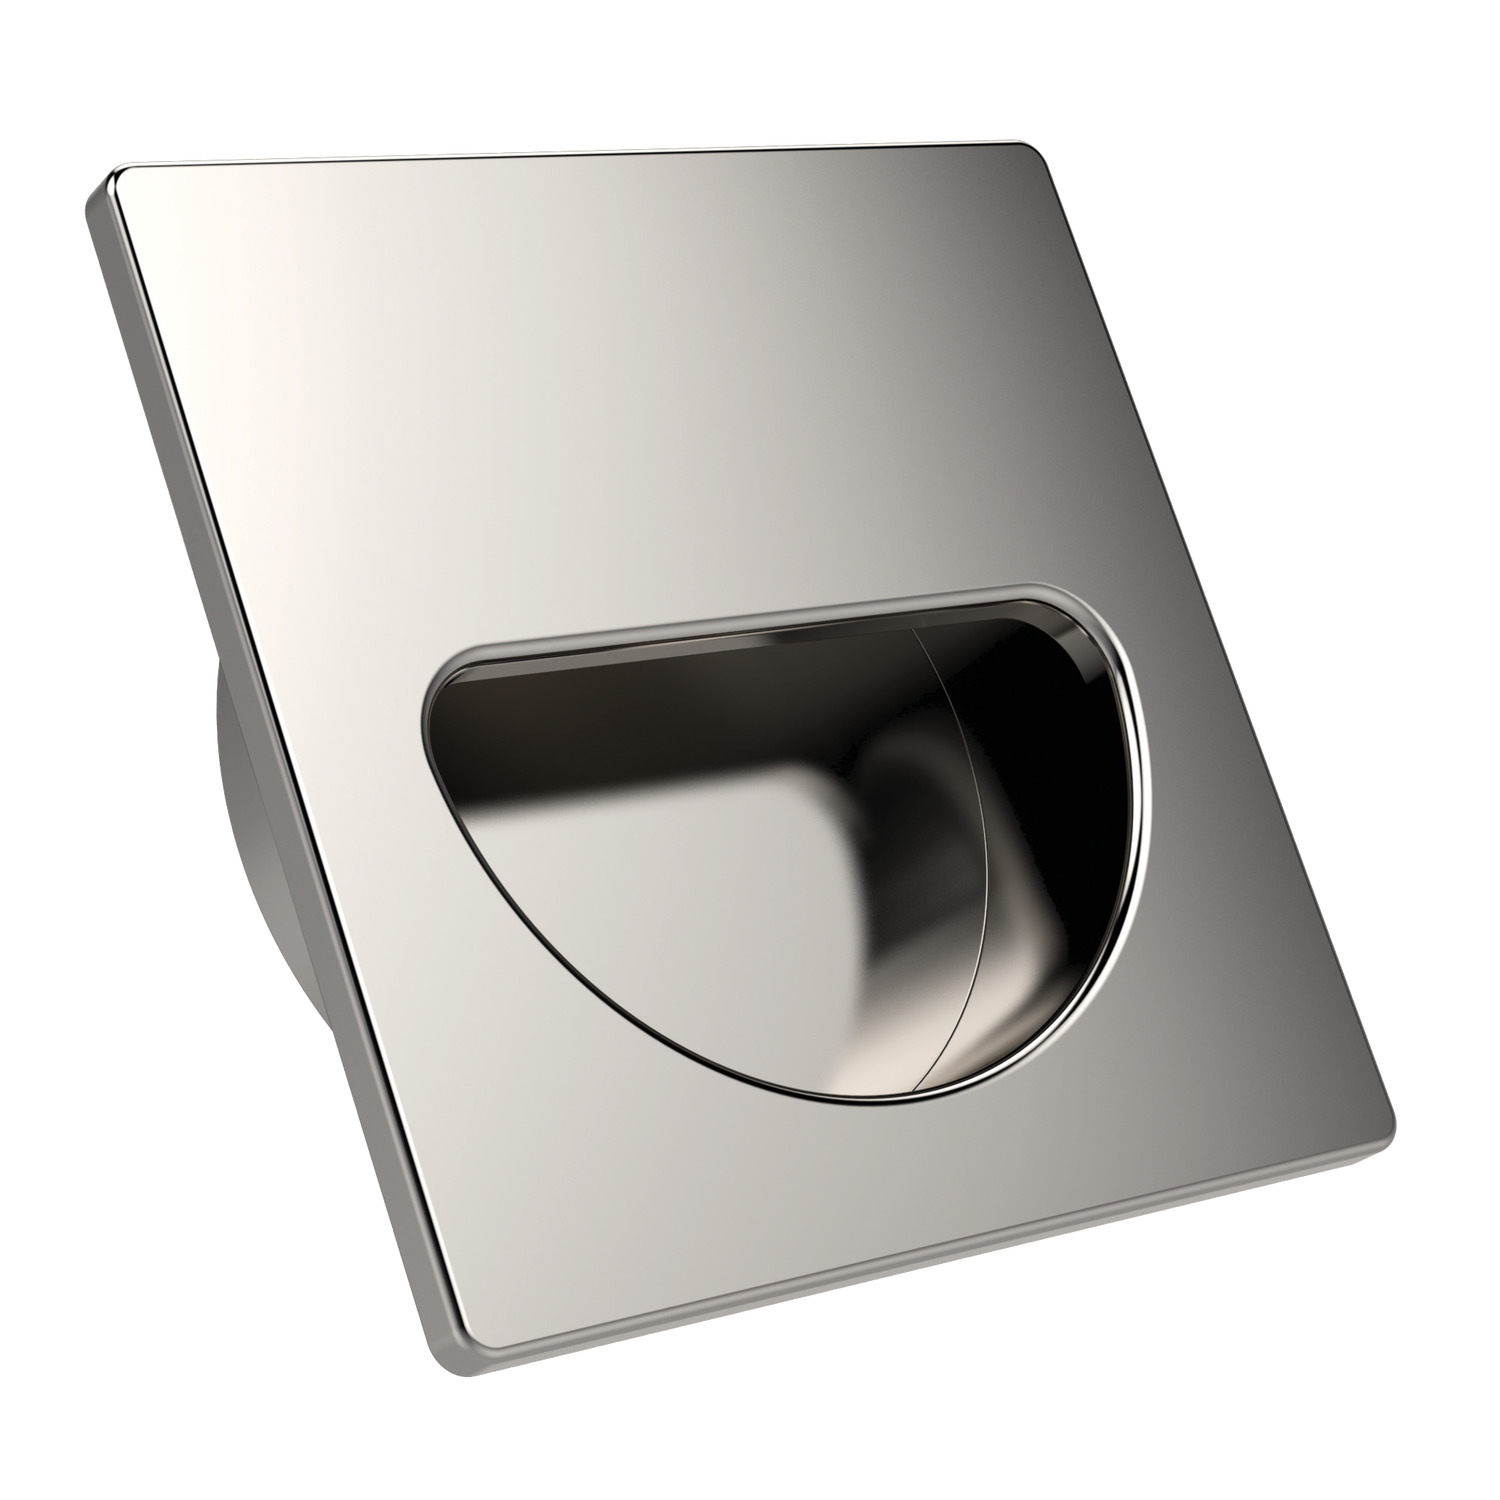 79510.W0048 Recessed Pull Handles, Stainless Steel Also known as U5380.AC048